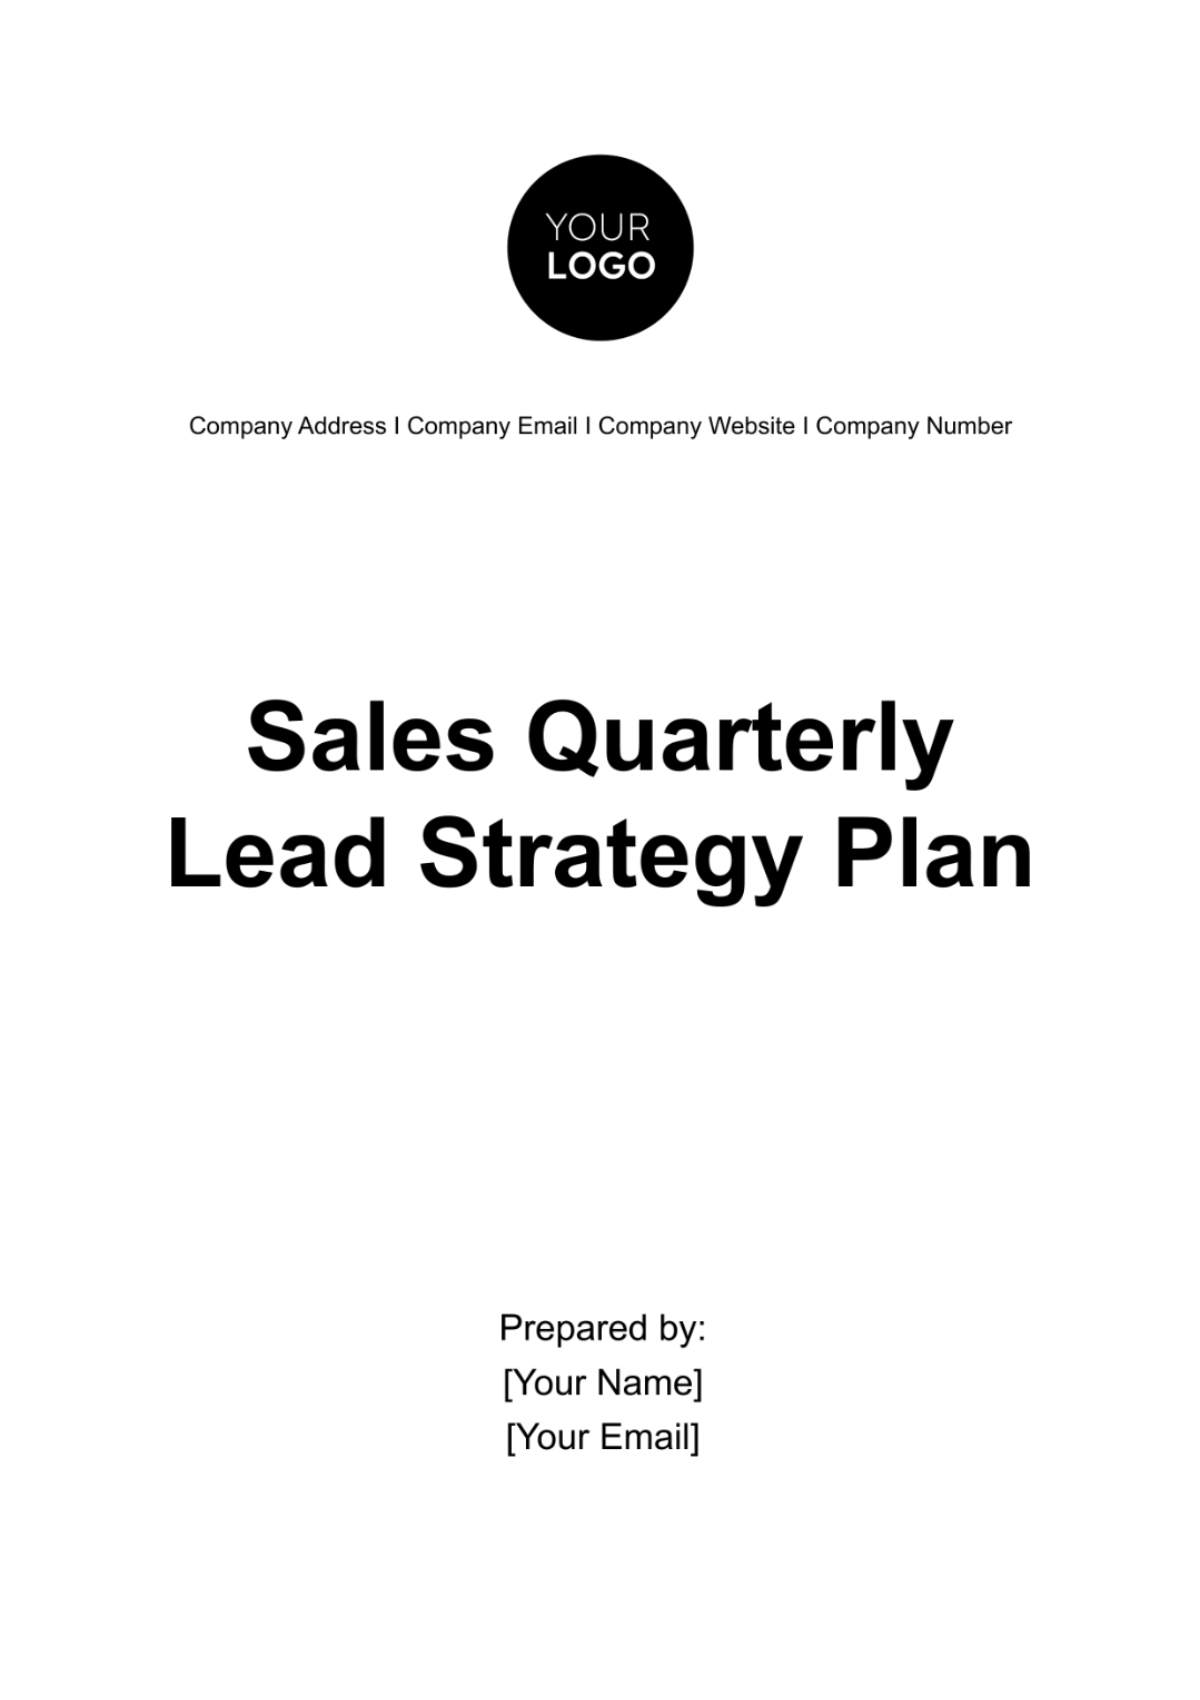 Sales Quarterly Lead Strategy Plan Template